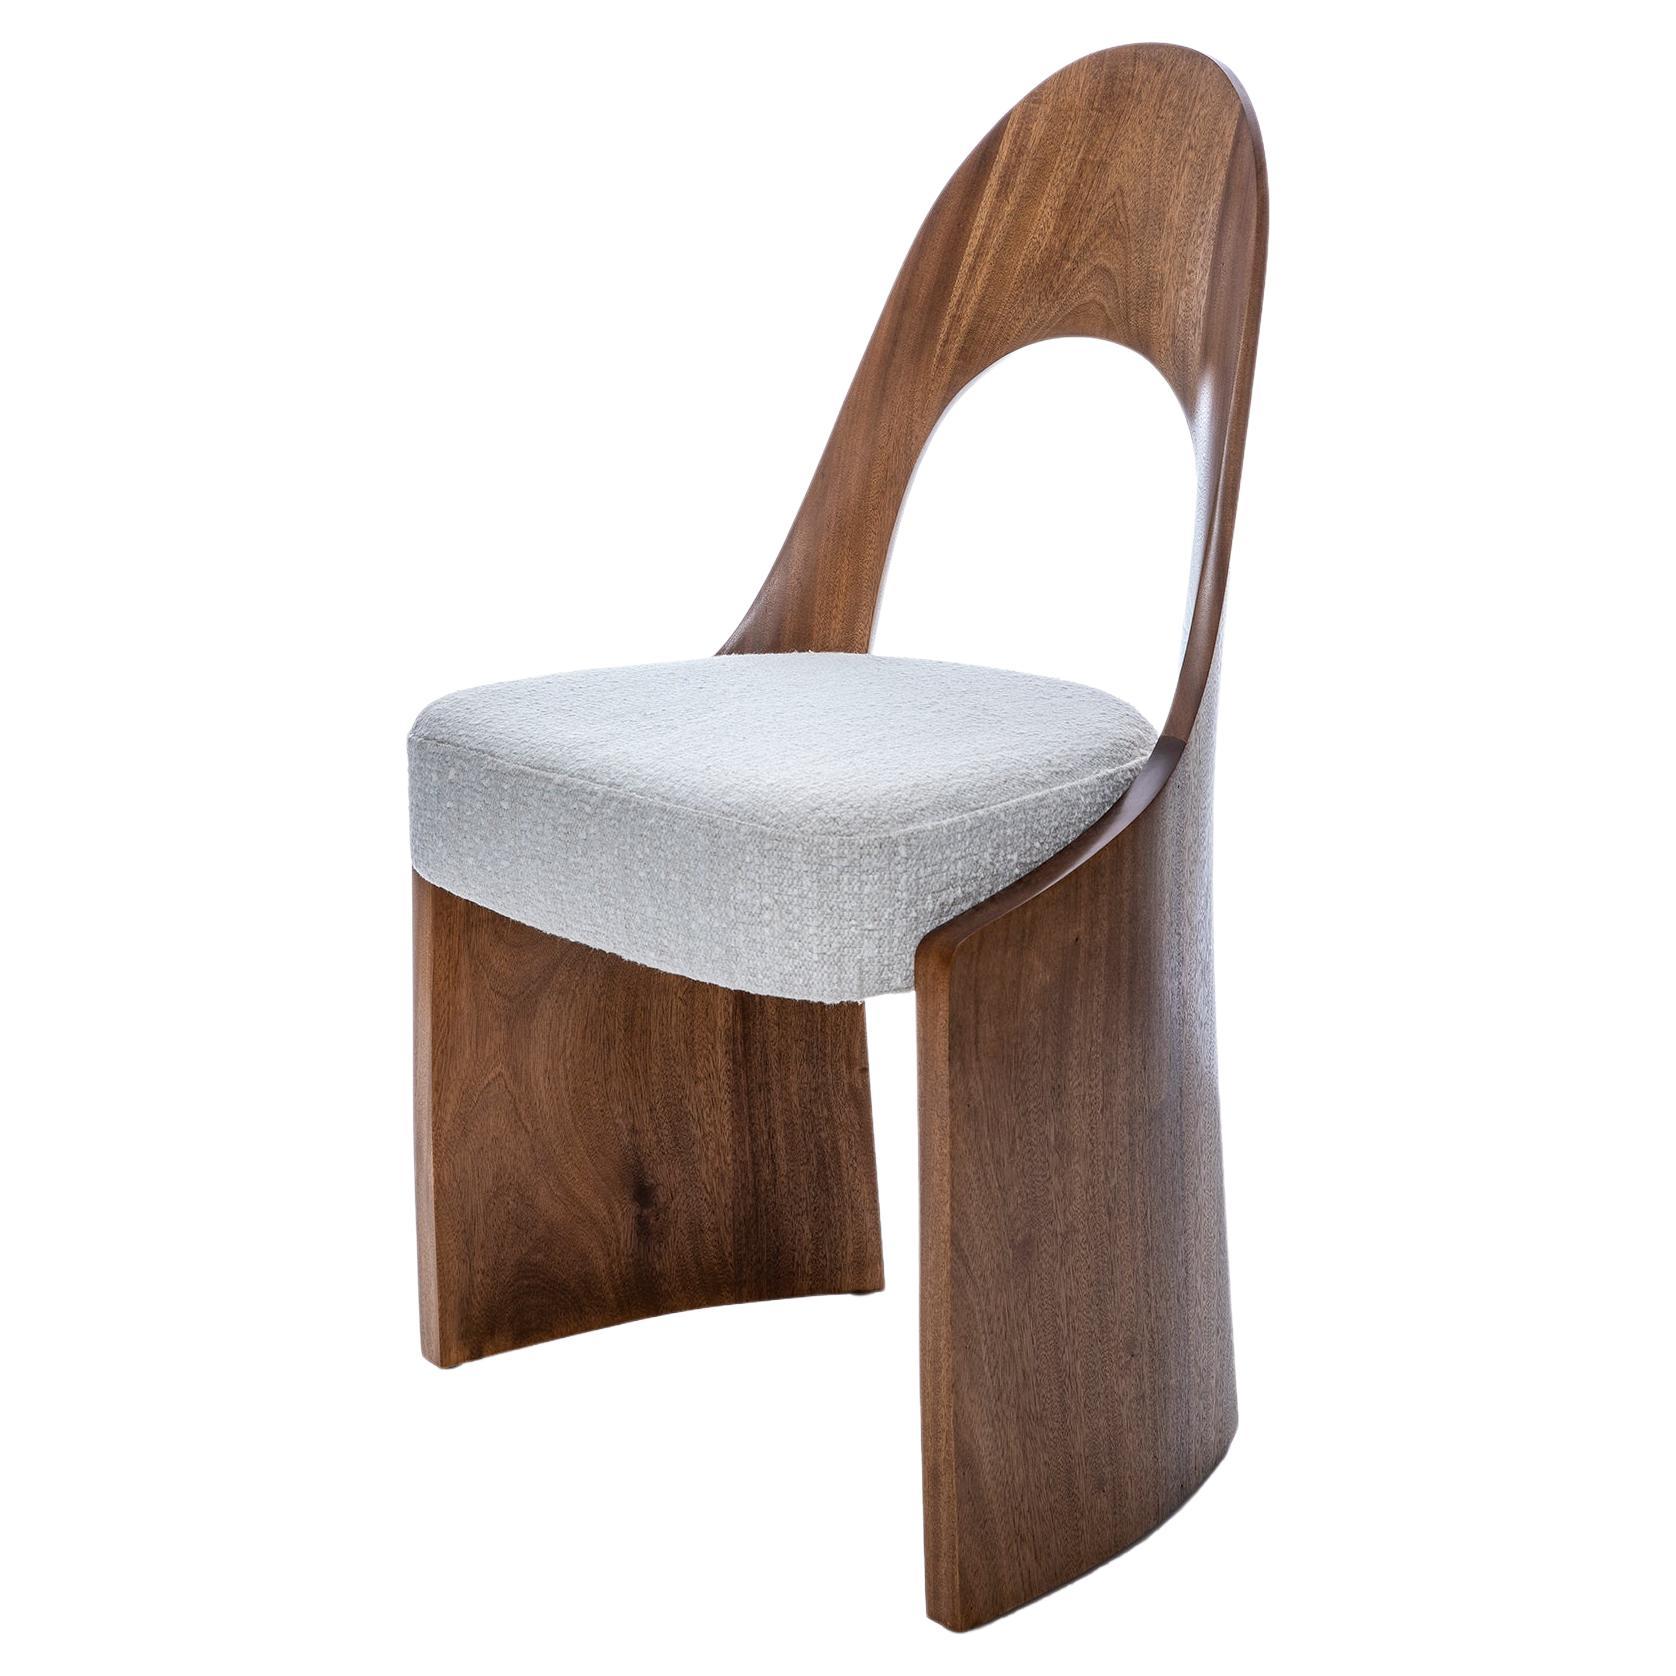 "Gaia" - Carved, Modern, Hand Finished Dining Chair - Wood Tone, COM